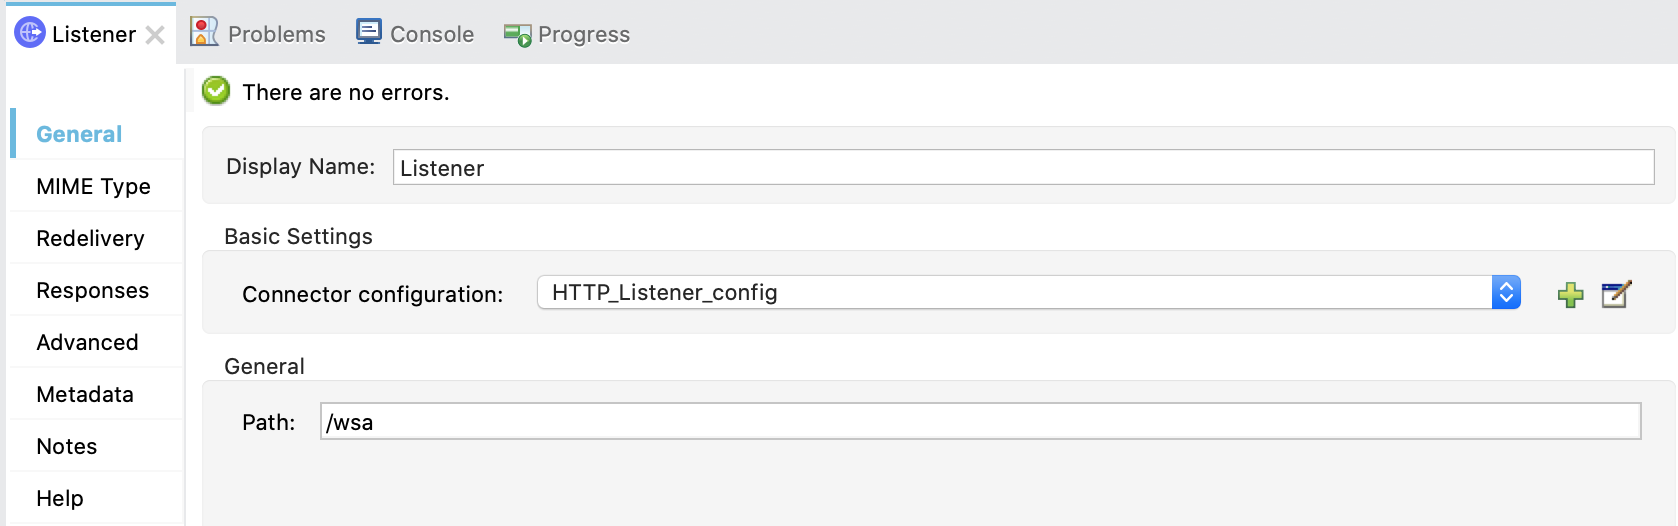 General configuration fields for HTTP Listener